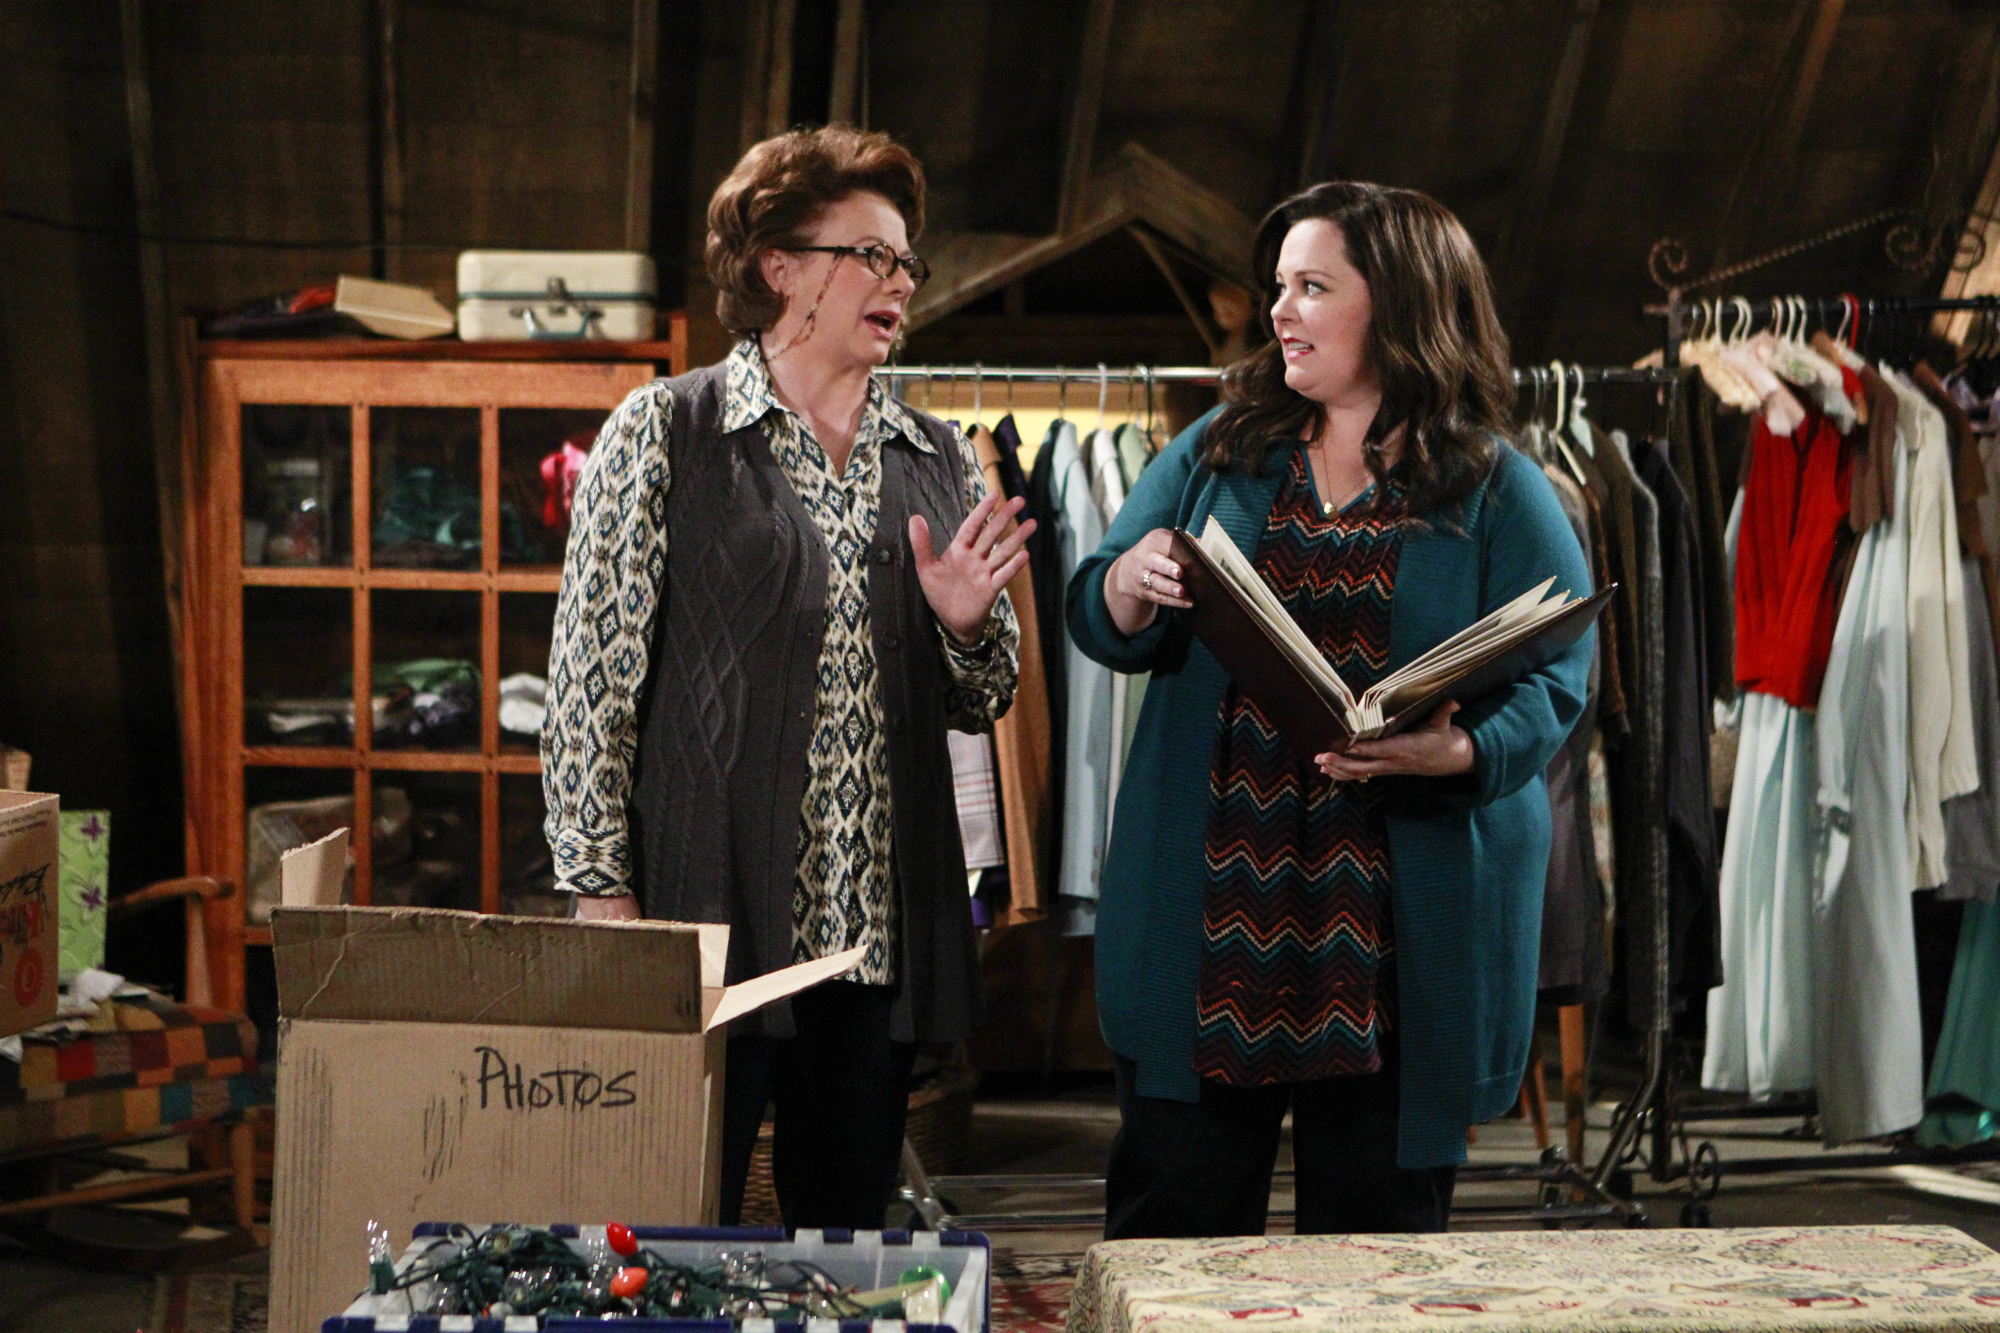 Rondi Reed as Peggy Biggs and Melissa McCarthy as Molly Flynn on Mike & Molly - 'What Ever Happened to Baby Peggy?'